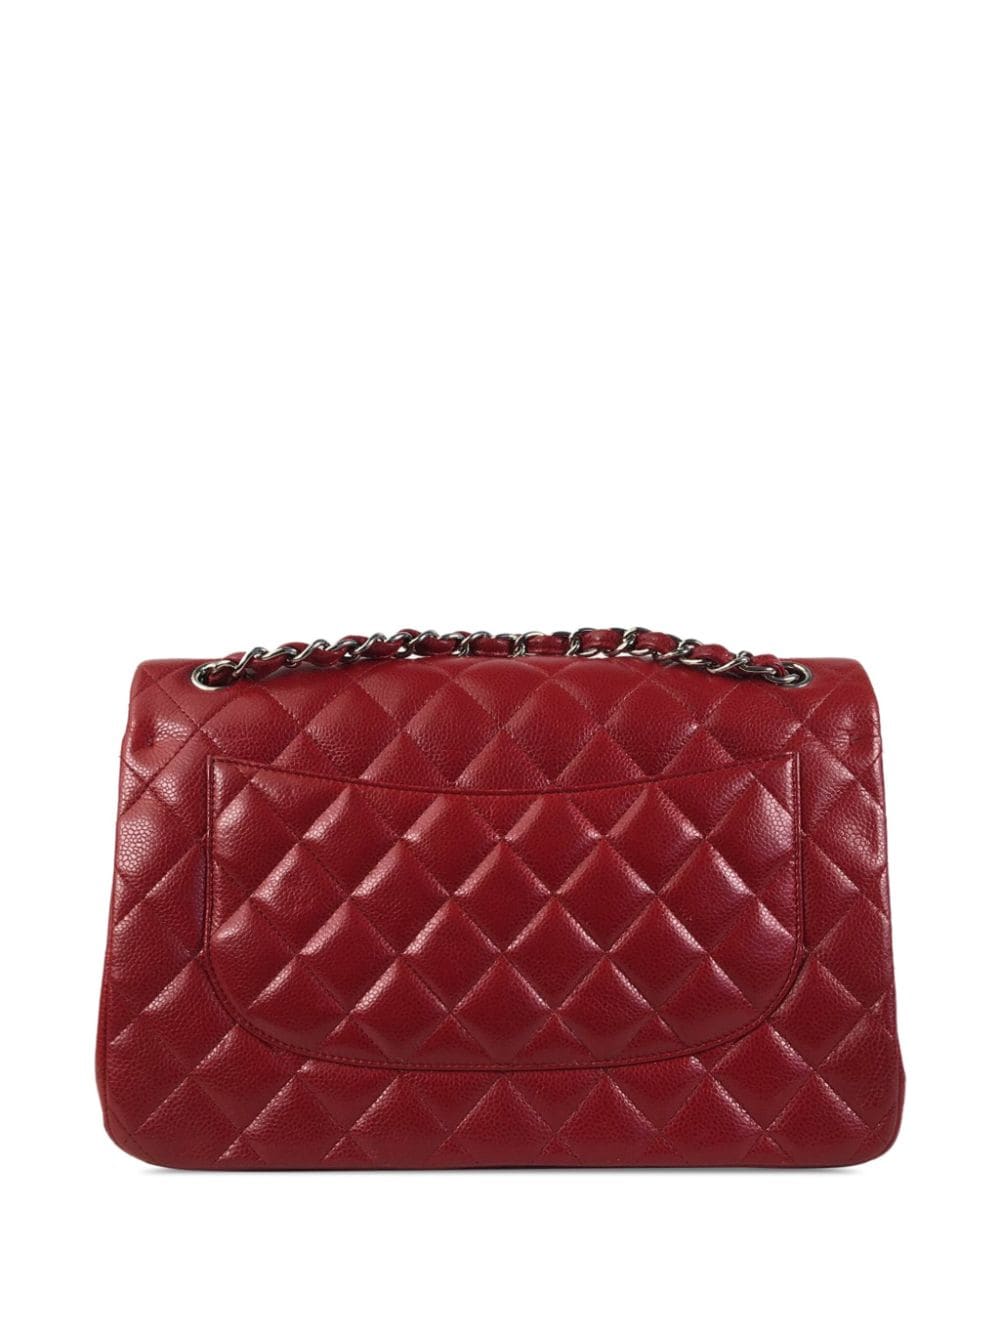 CHANEL Pre-Owned 2012 Jumbo Classic Caviar Double Flap shoulder bag - Rood